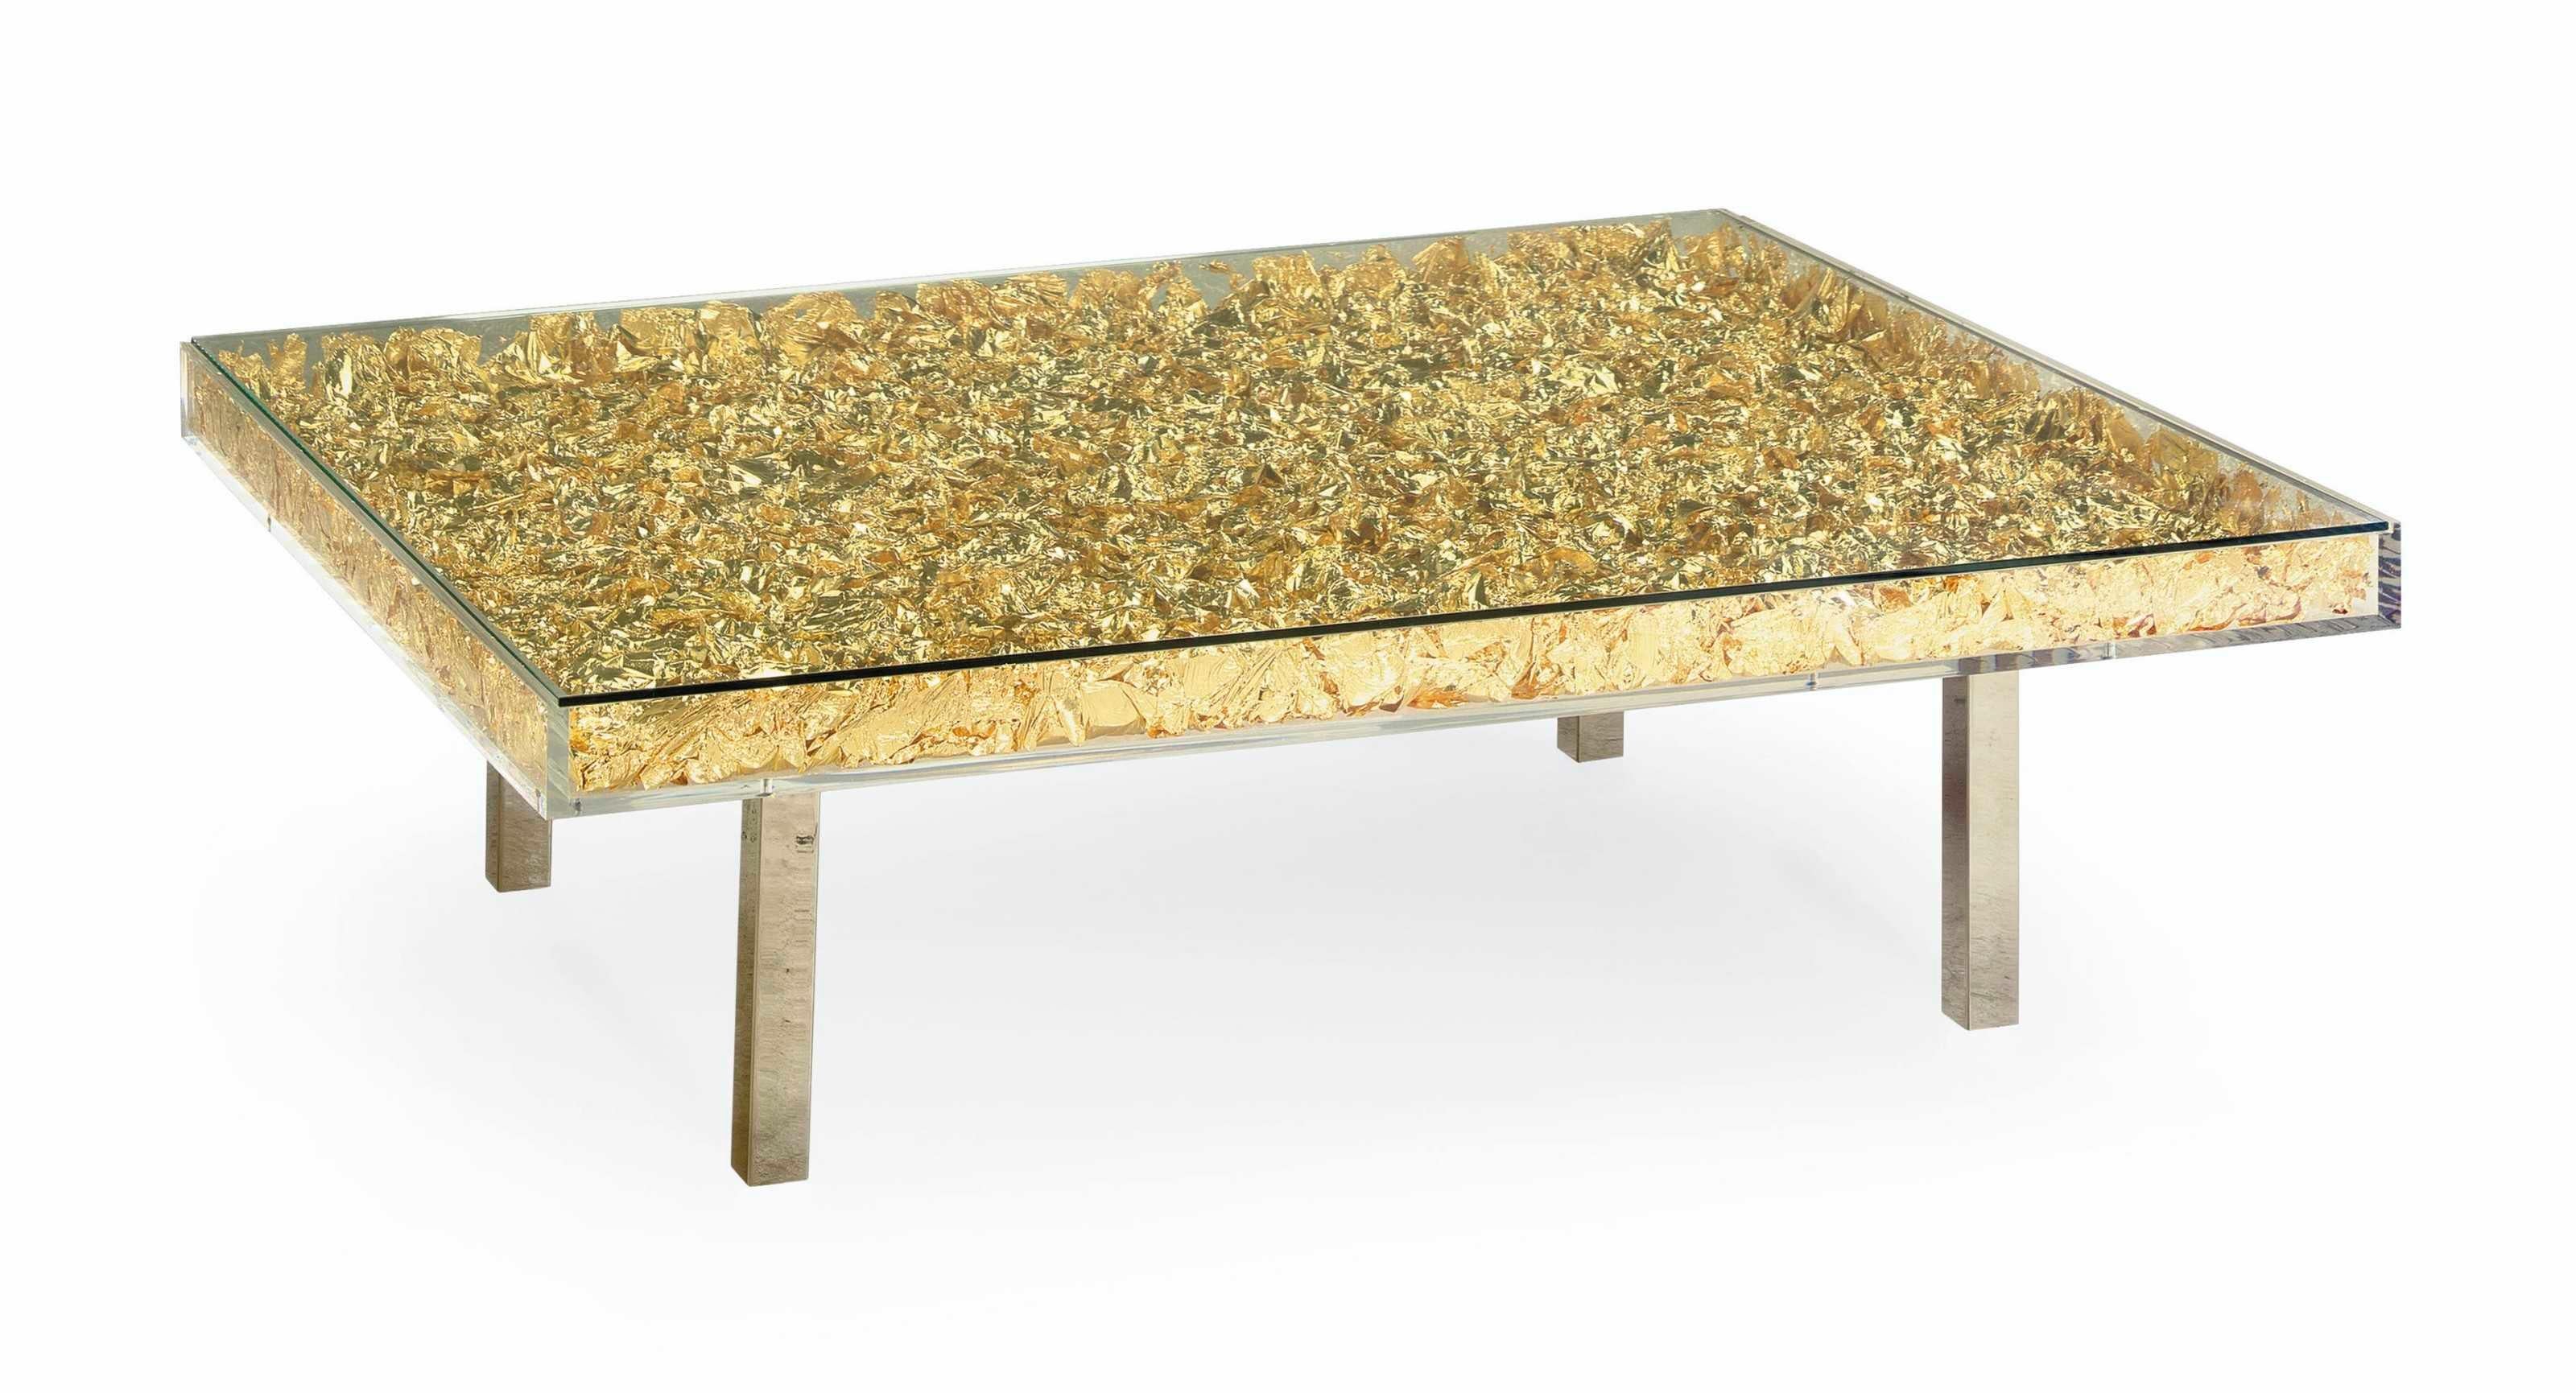 Yves Klein Monogold table with glass top and plexiglass incorporating gold leaves on chrome-plated straight legs. Cartel under the table bearing the serial number and the signature of Mrs. Rotraut Klein-Moquay.